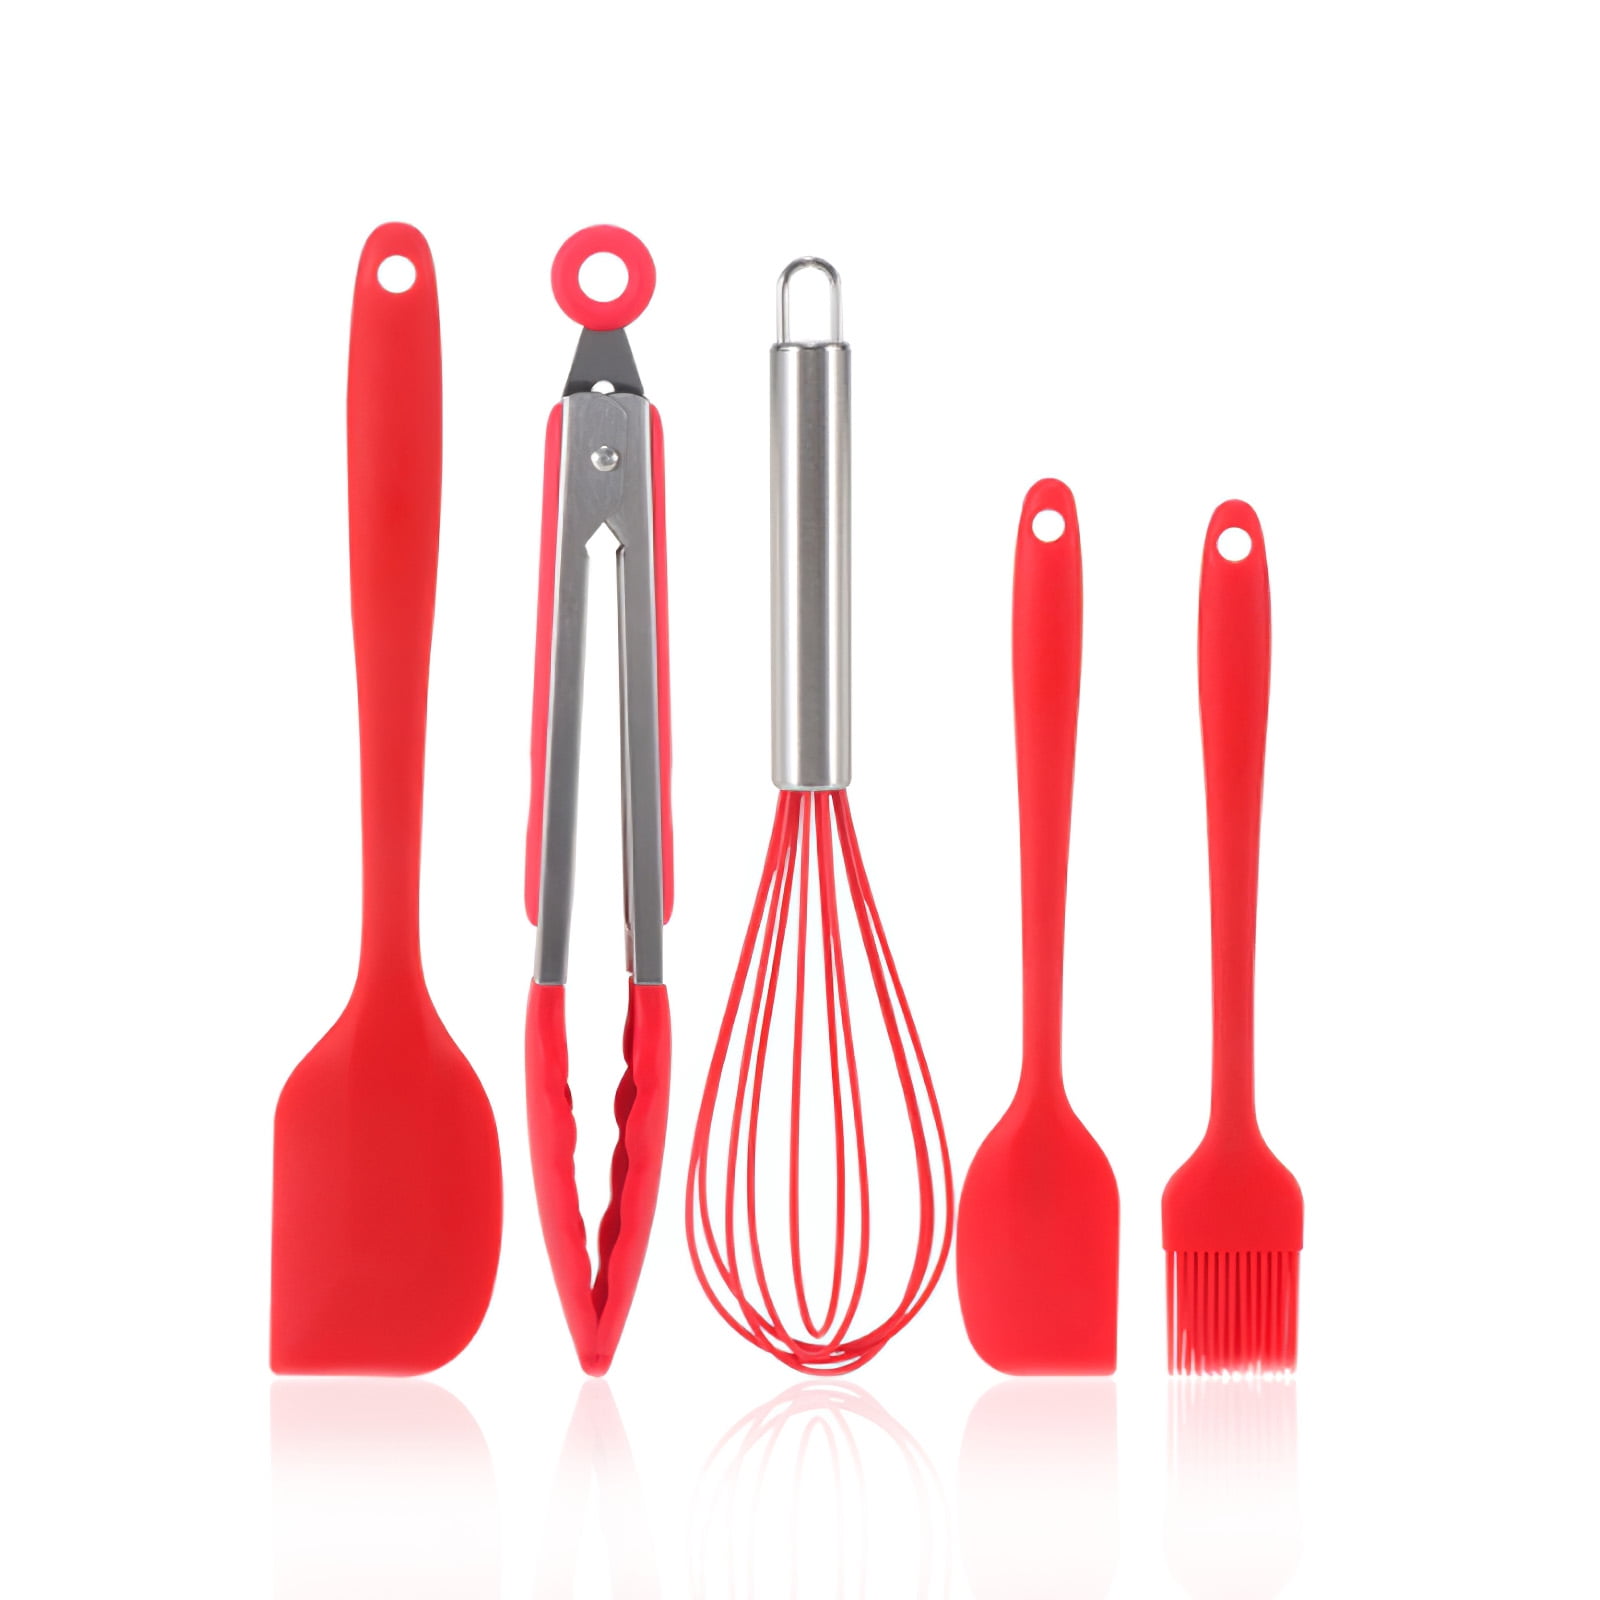 Nokstar Silicone Cook Utensils Set, 5 Piece Kitchen Cooking Set, Includes  Kitchen Tongs, Large Spatula, Small Spatula, Basting Brush, Whisk